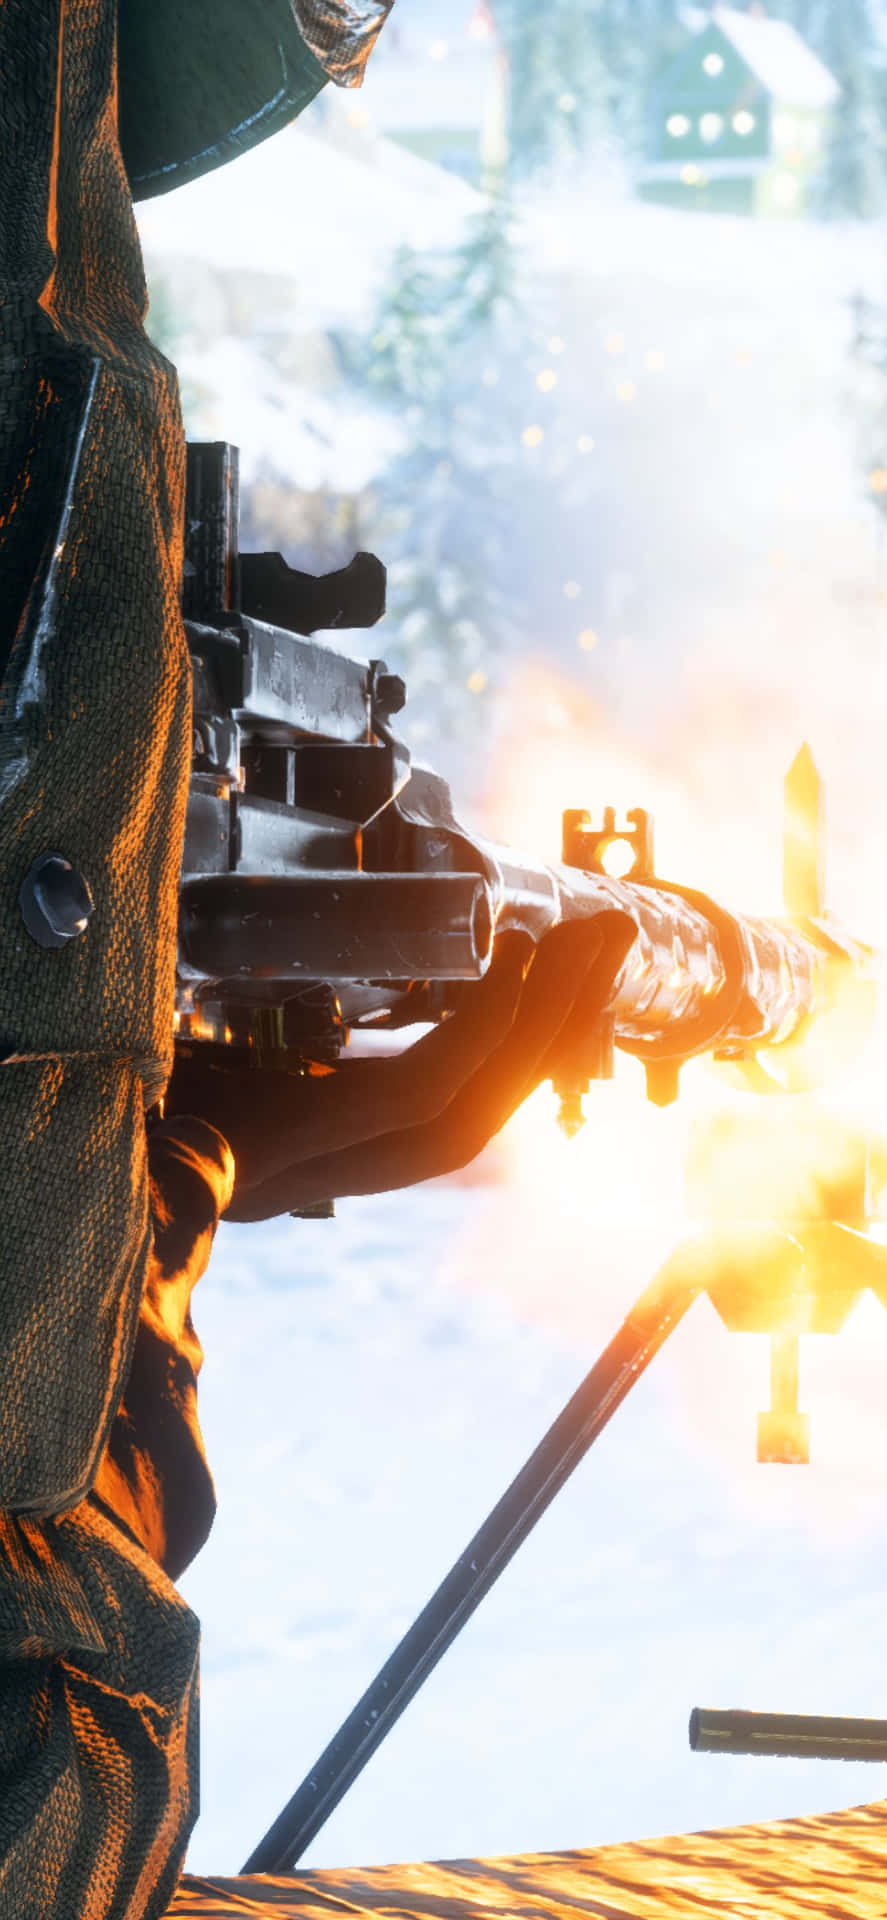 Iphone Xs Max Battlefield V Snow Town Fight Background